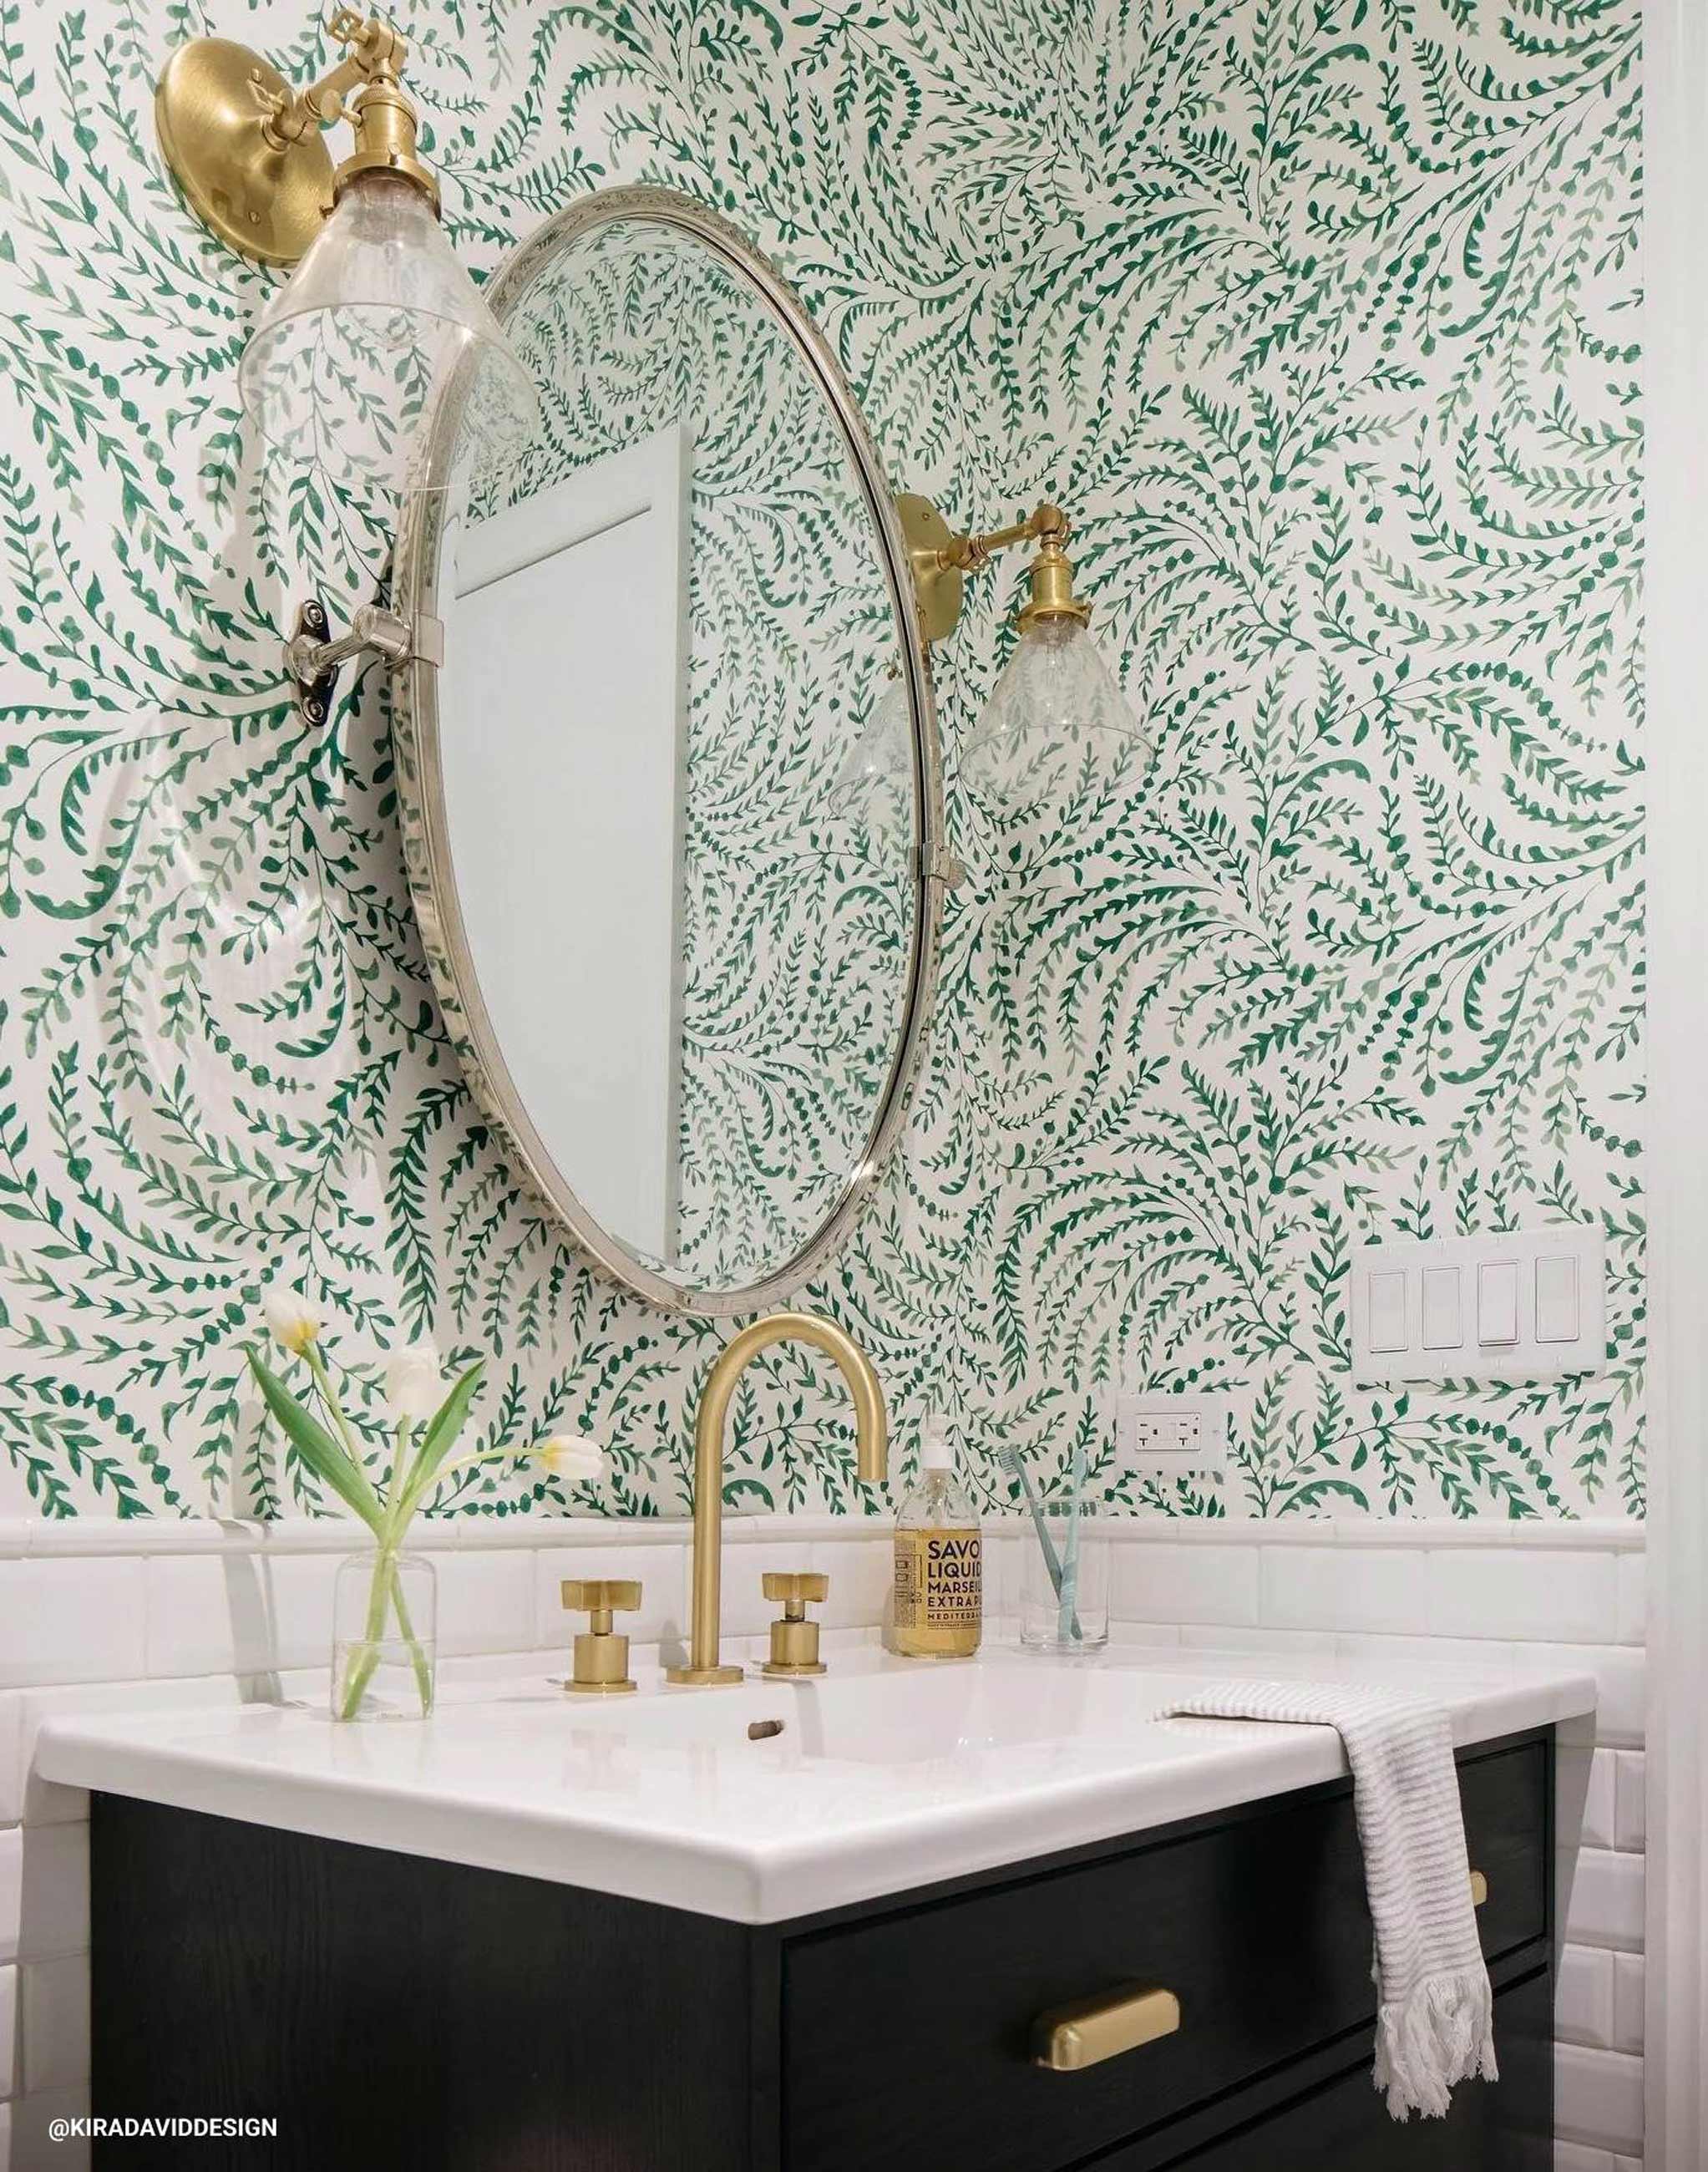 5 Styling Tips To Create The Ultimate Bathroom Oasis – Schoolhouse